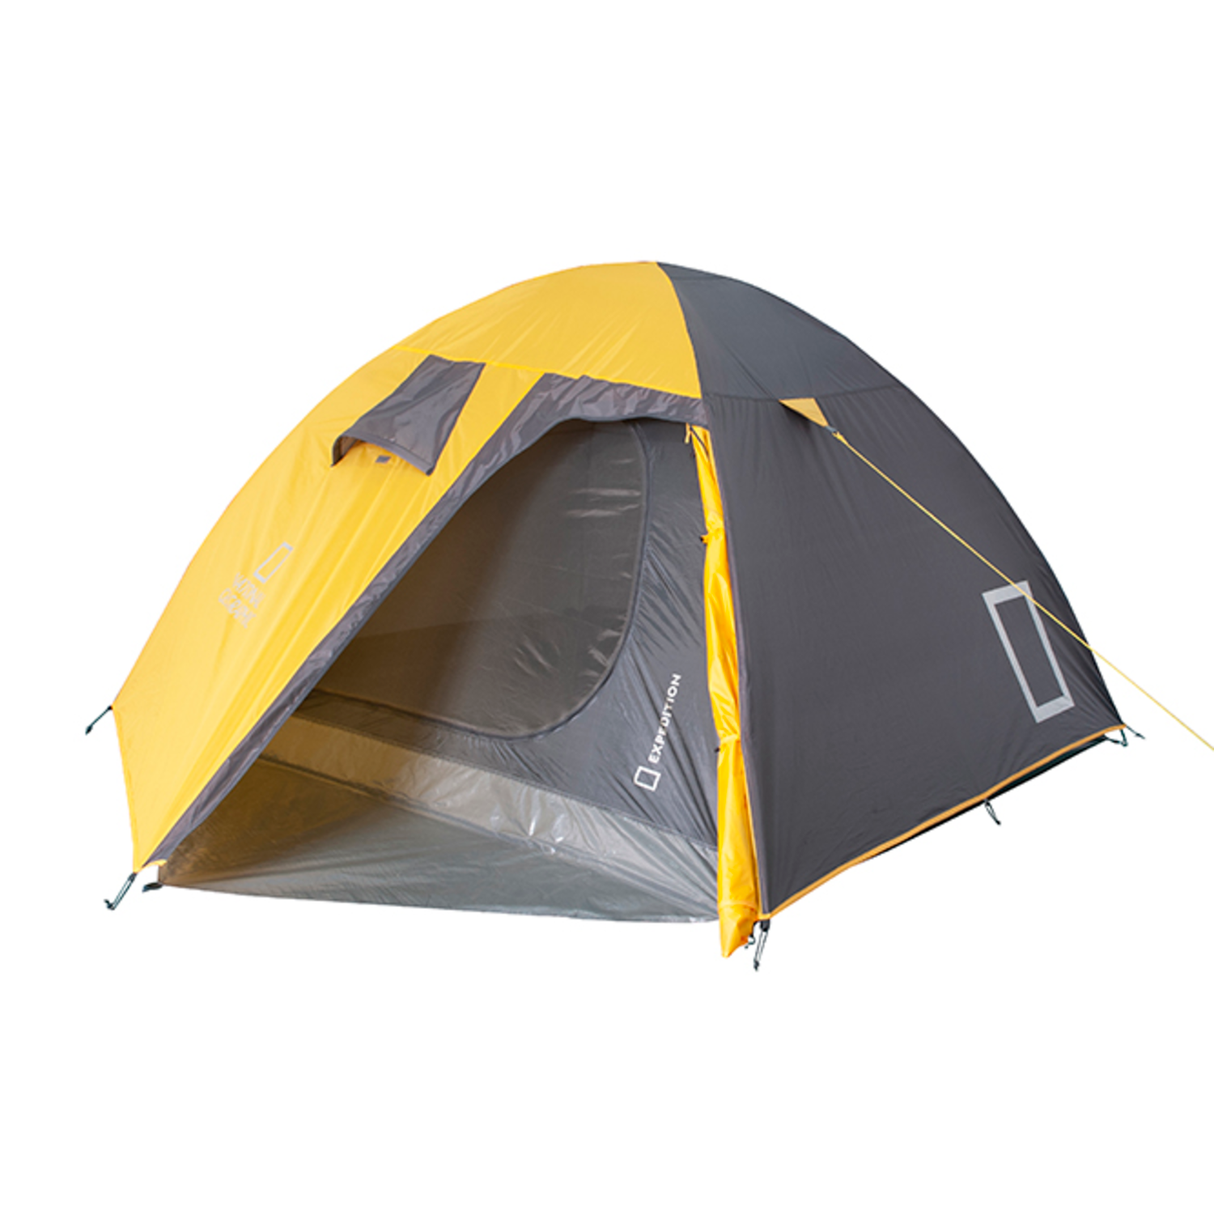 NATIONAL GEOGRAPHIC Silla De Camping National Geographic